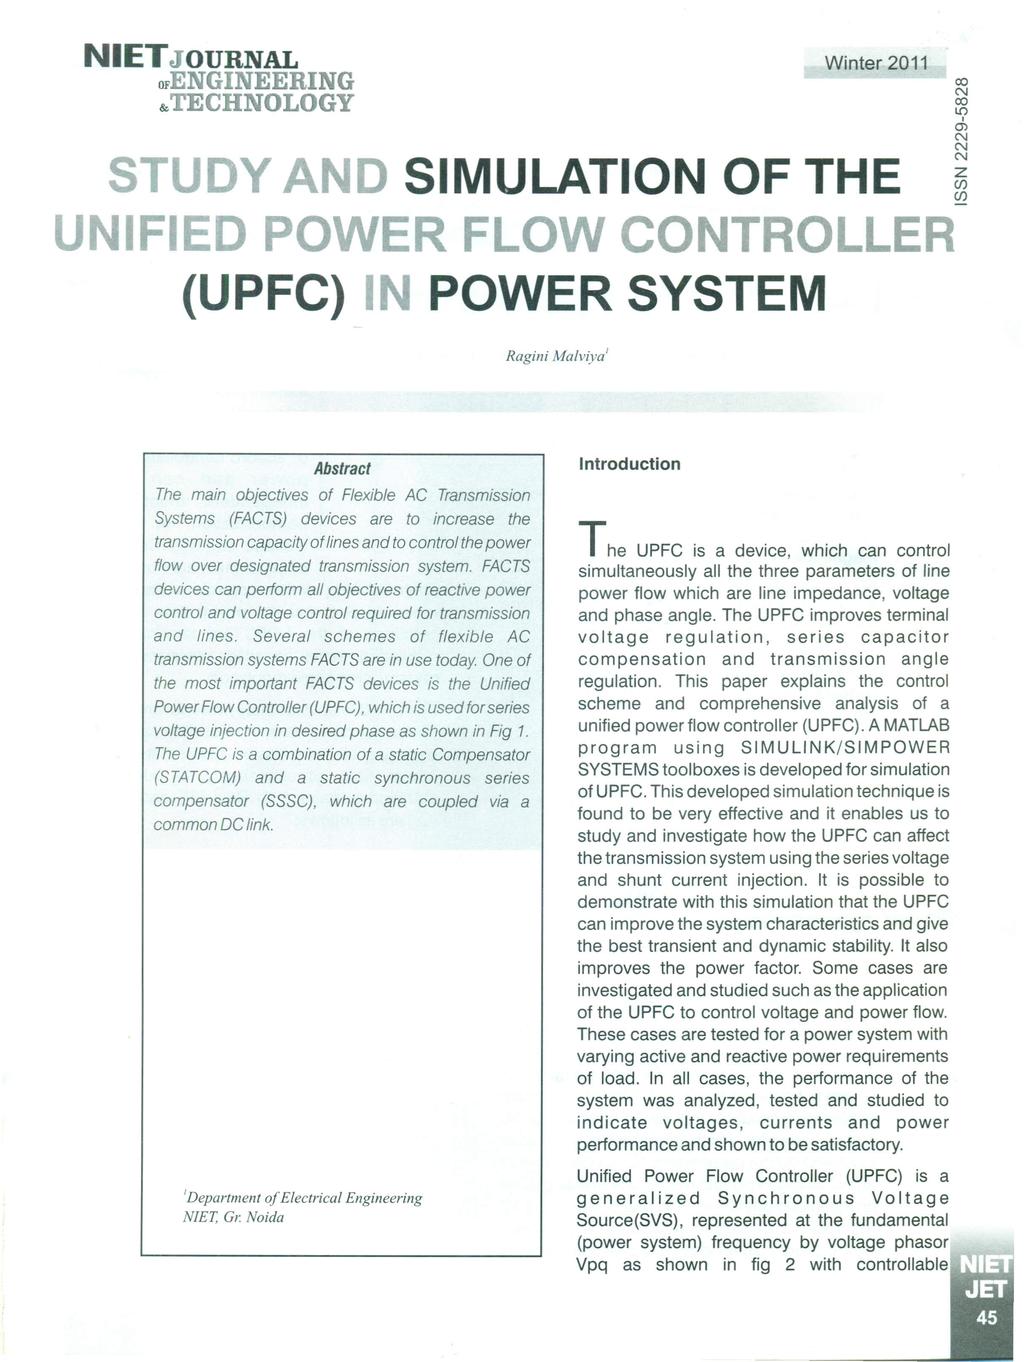 IETJOURAL ofegieerig &TECHOLOGY Winter 2011 STUDY AD SIMULATIO OF THE UIFIED POWER FLOW COTROLLER (UPFC) I POWER SYSTEM Ragini Malviya' co co L{) I (J) Z (j) (j) The main objectives Abstract of